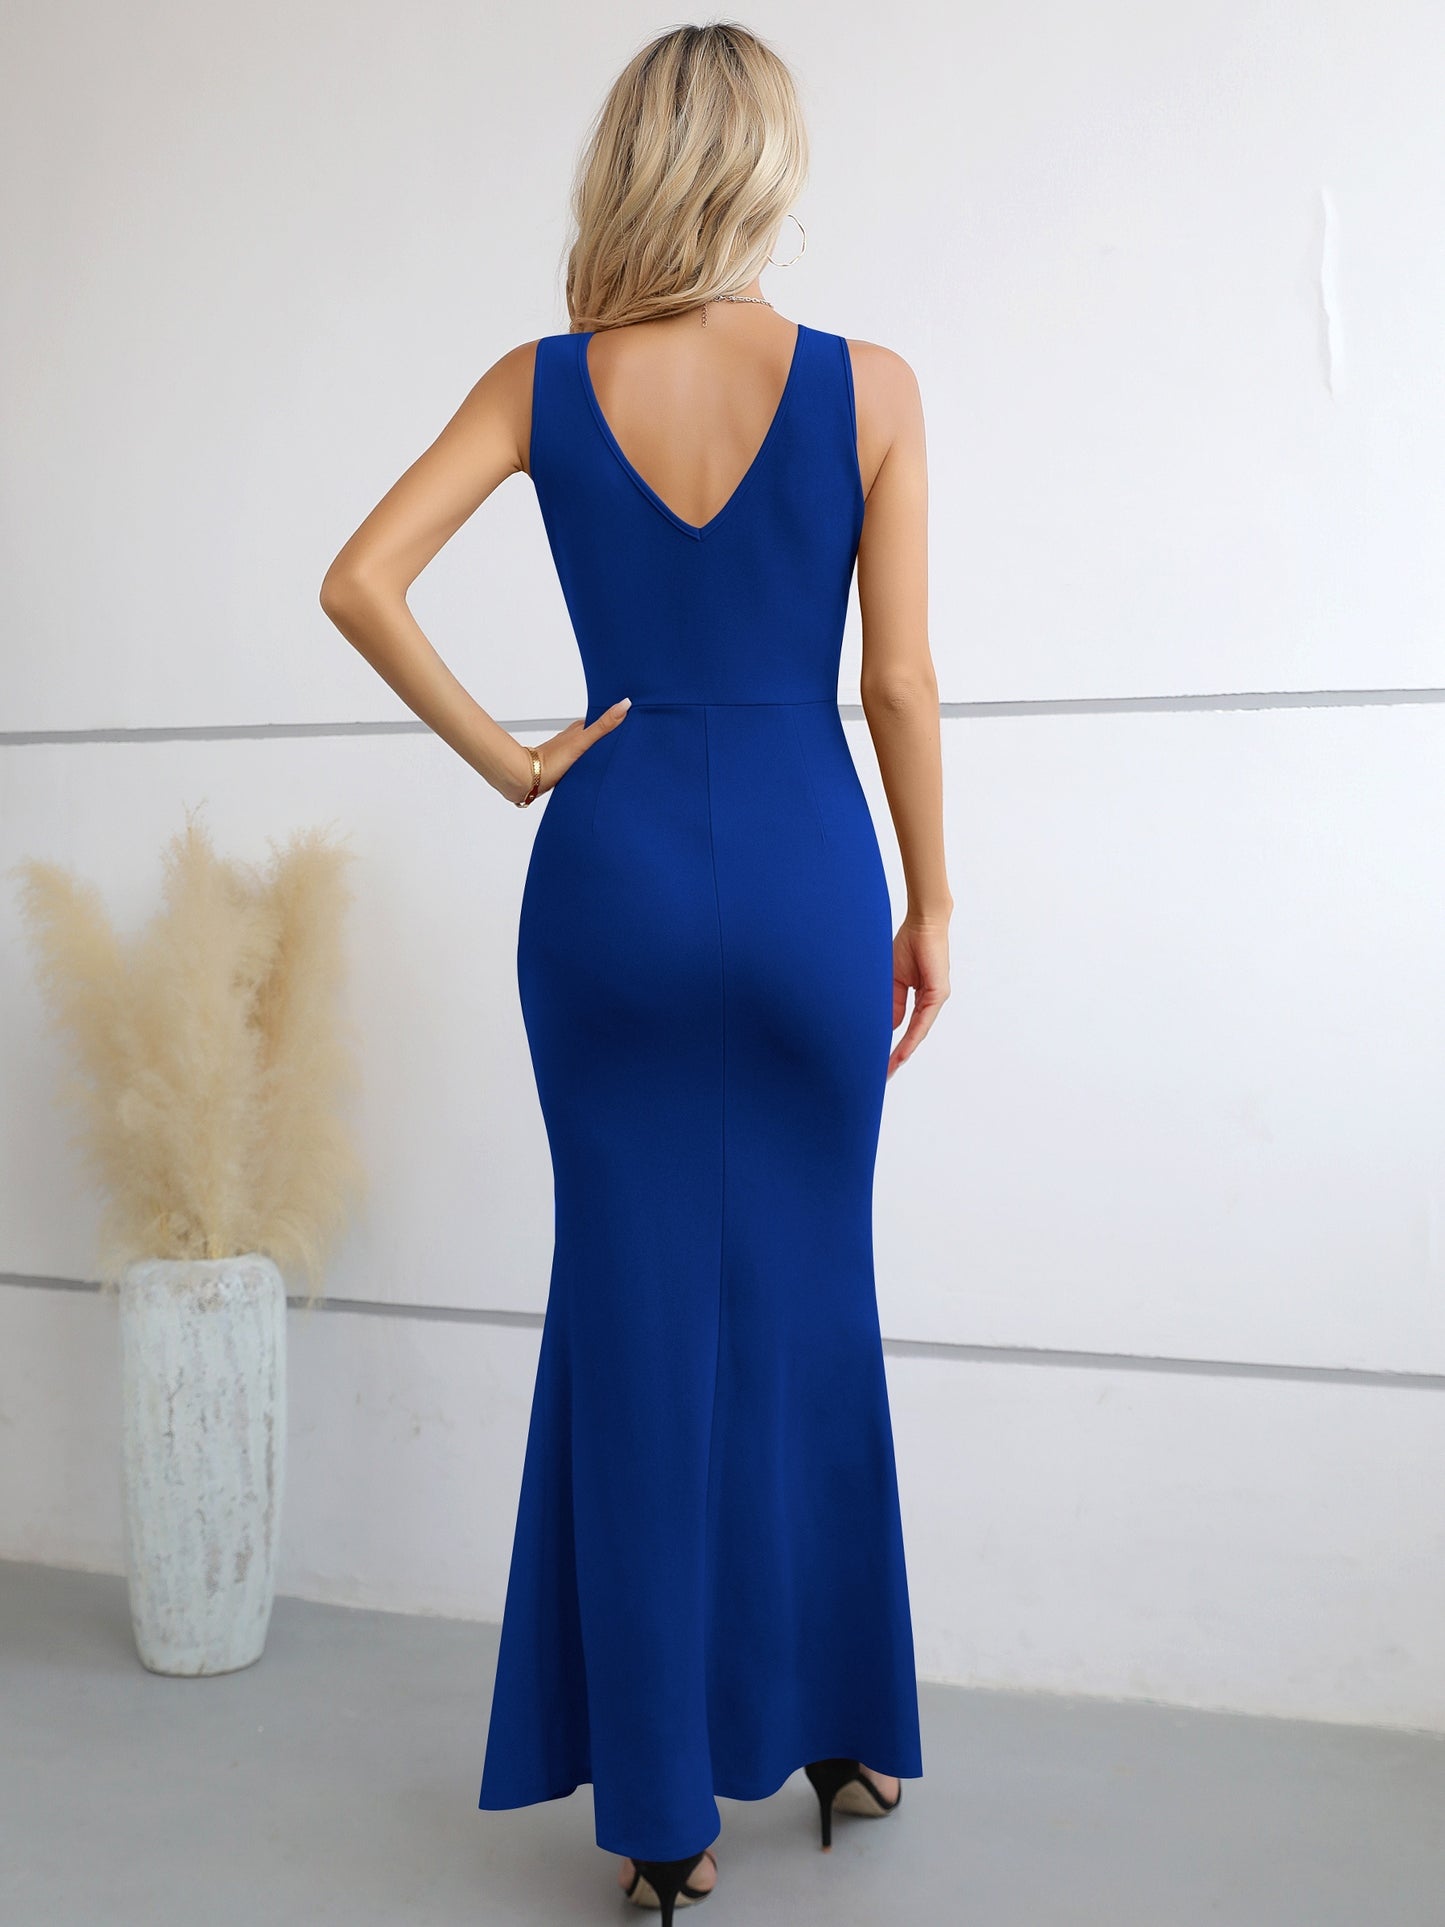 Empower Your Style with Our Elegant Surplice Neck Dress for Parties and Banquets - Women's Clothing